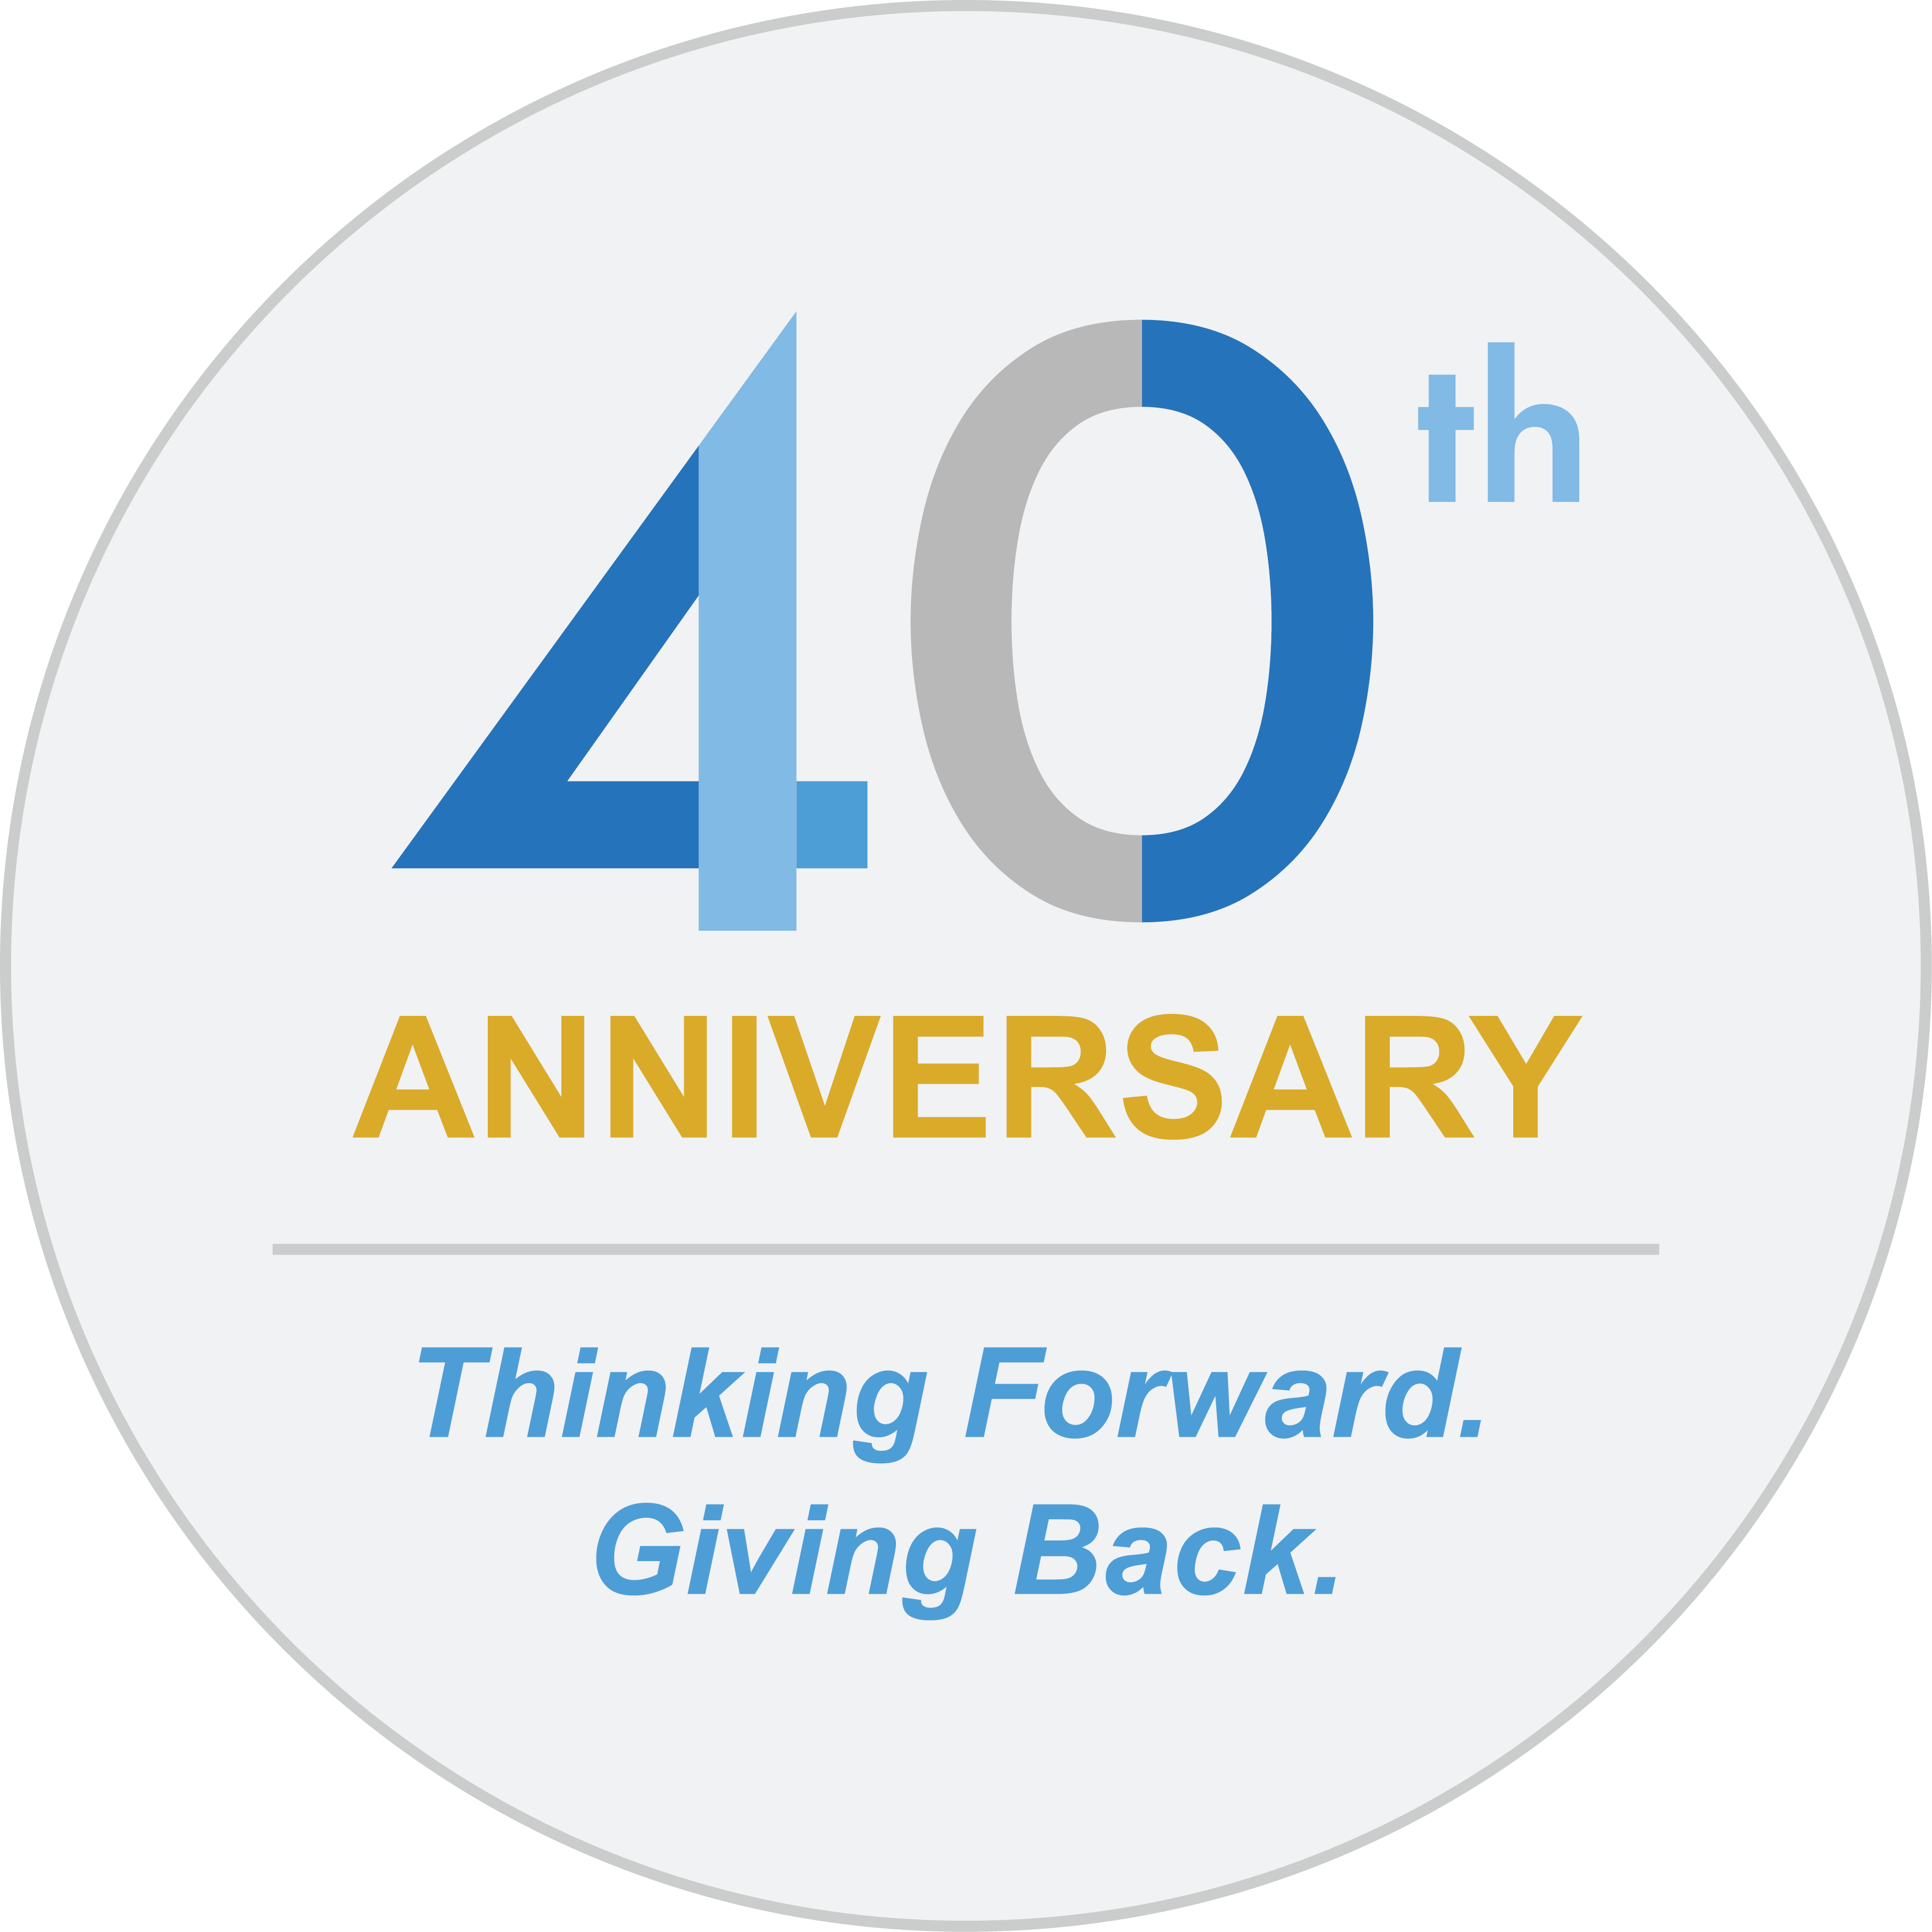 The theme for our 40th anniversary is, “Thinking forward. Giving back.” This theme highlights our commitment to “thinking forward” and bringing the latest innovation and forward-thinking strategies to our clients while also underscoring our focus on “giving back” to our local Atlanta community. Giving back has always been at the core of who we are as a firm, and we look forward to serving the Atlanta community as part of our celebration. We invite you to join us in this celebration by giving back to your community in a way that is meaningful to you.